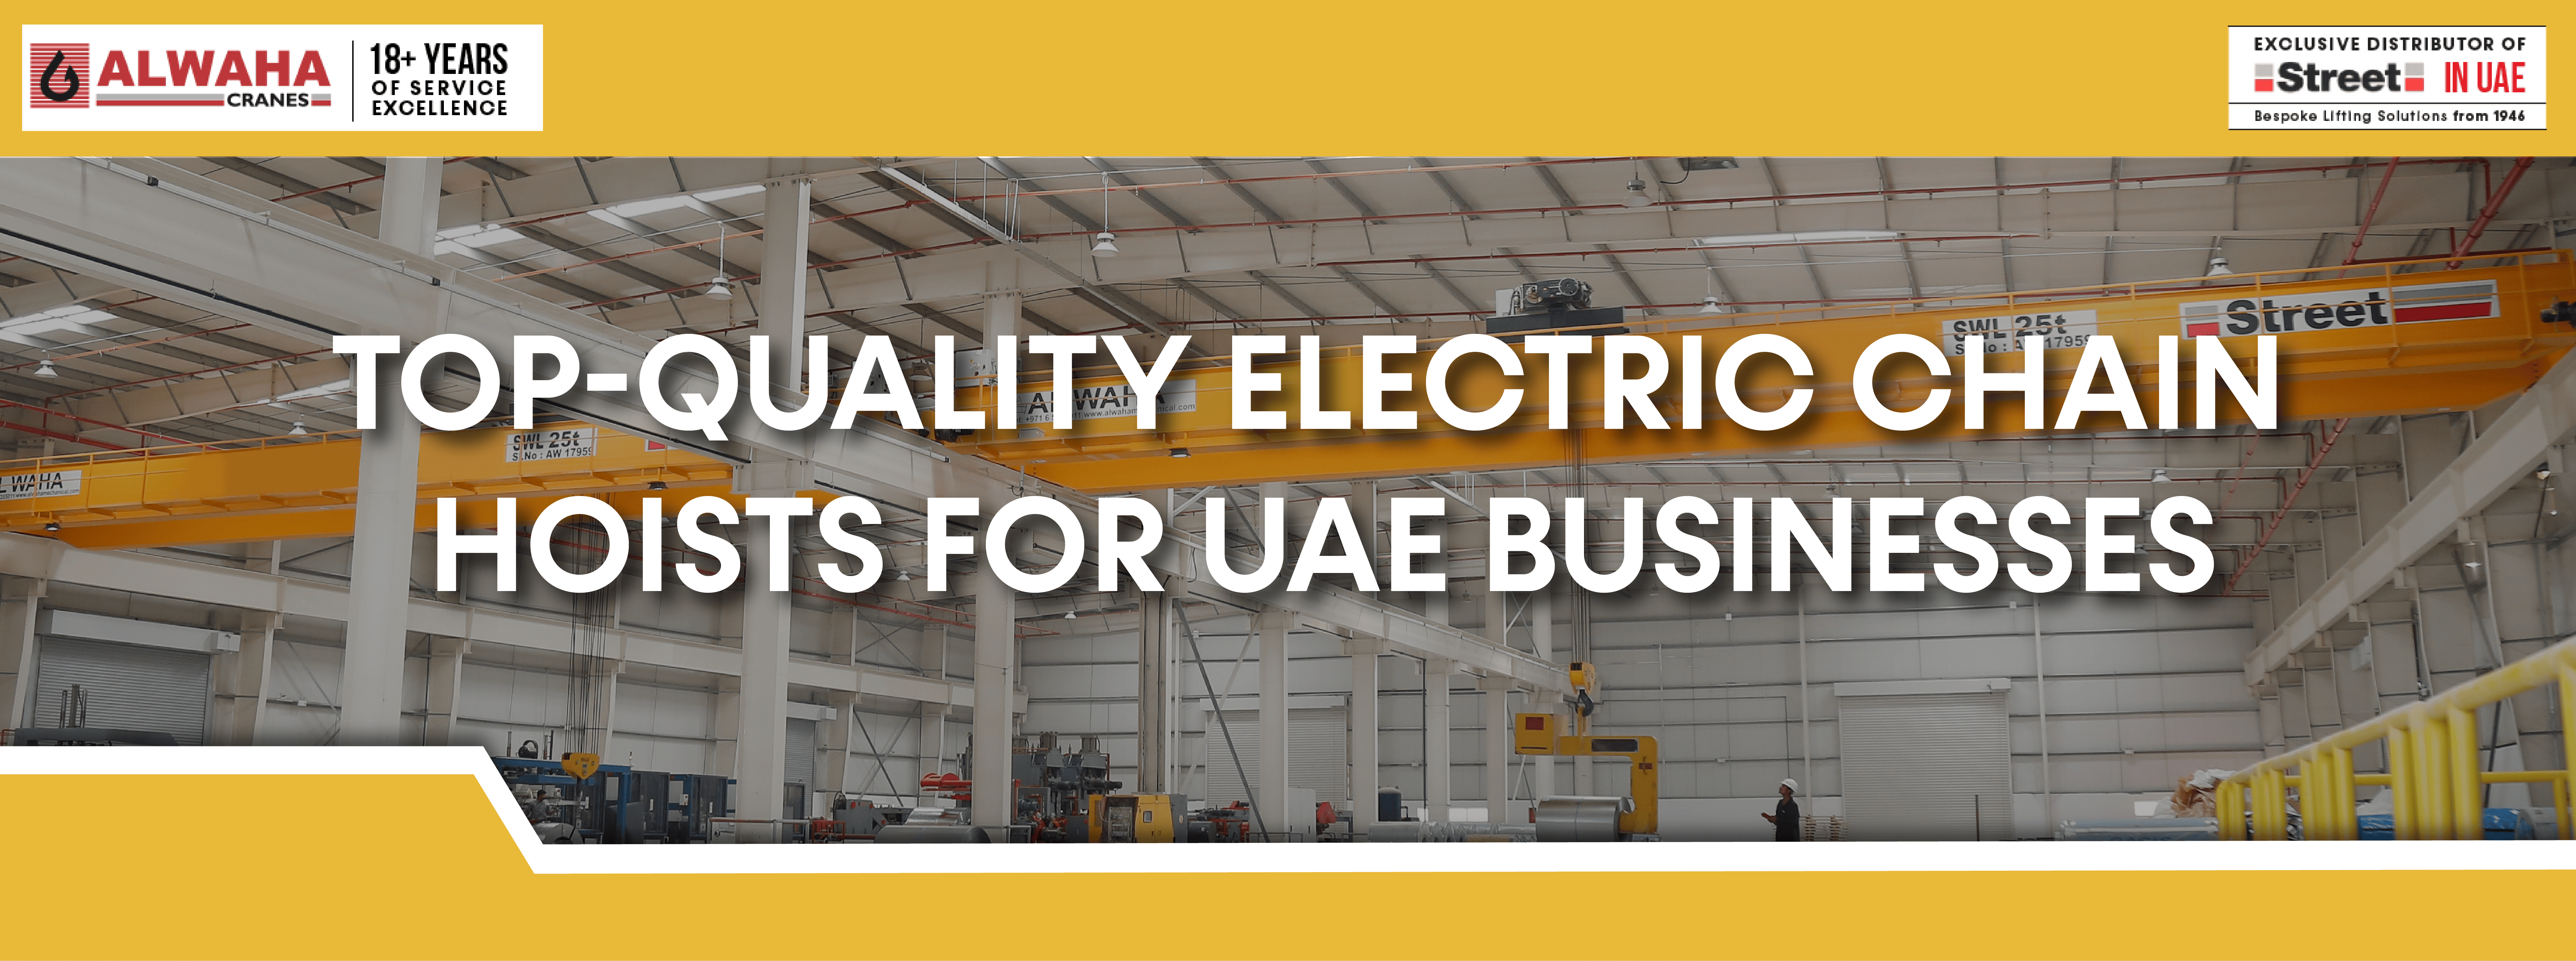 Top-Quality Electric Chain Hoists for UAE Businesses